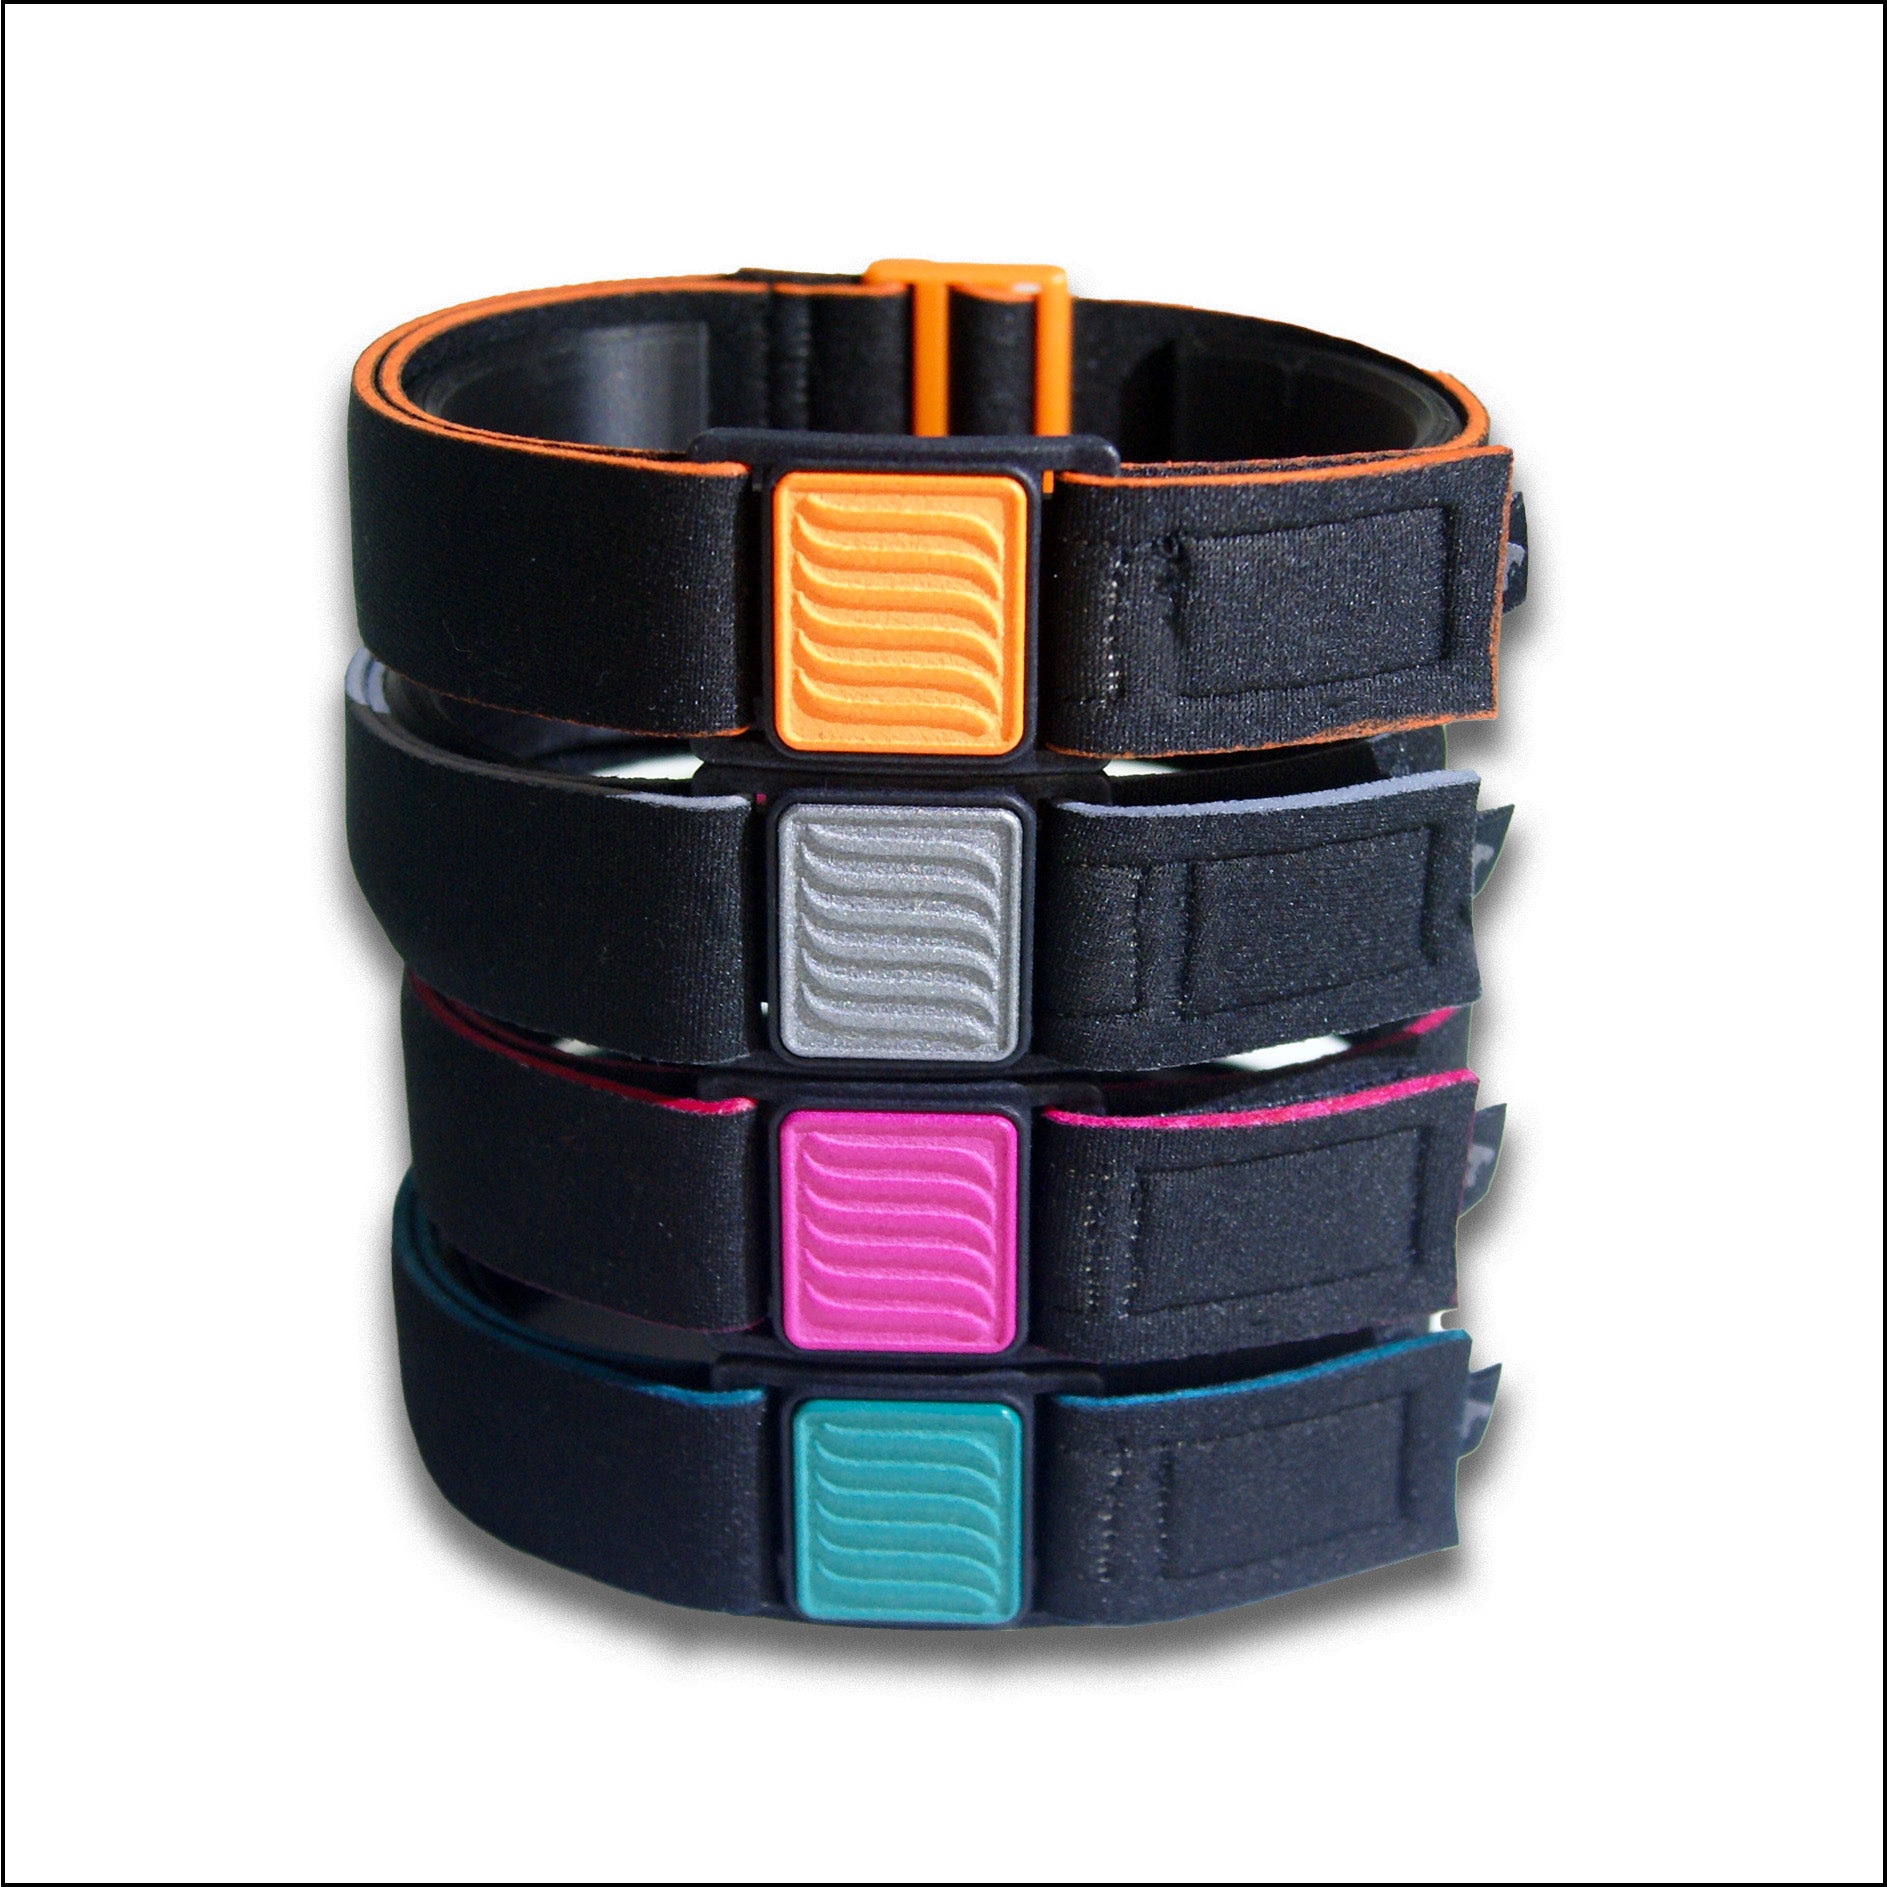 Stack of Libreband armbands for FreeStyle Libre 3 CGM.